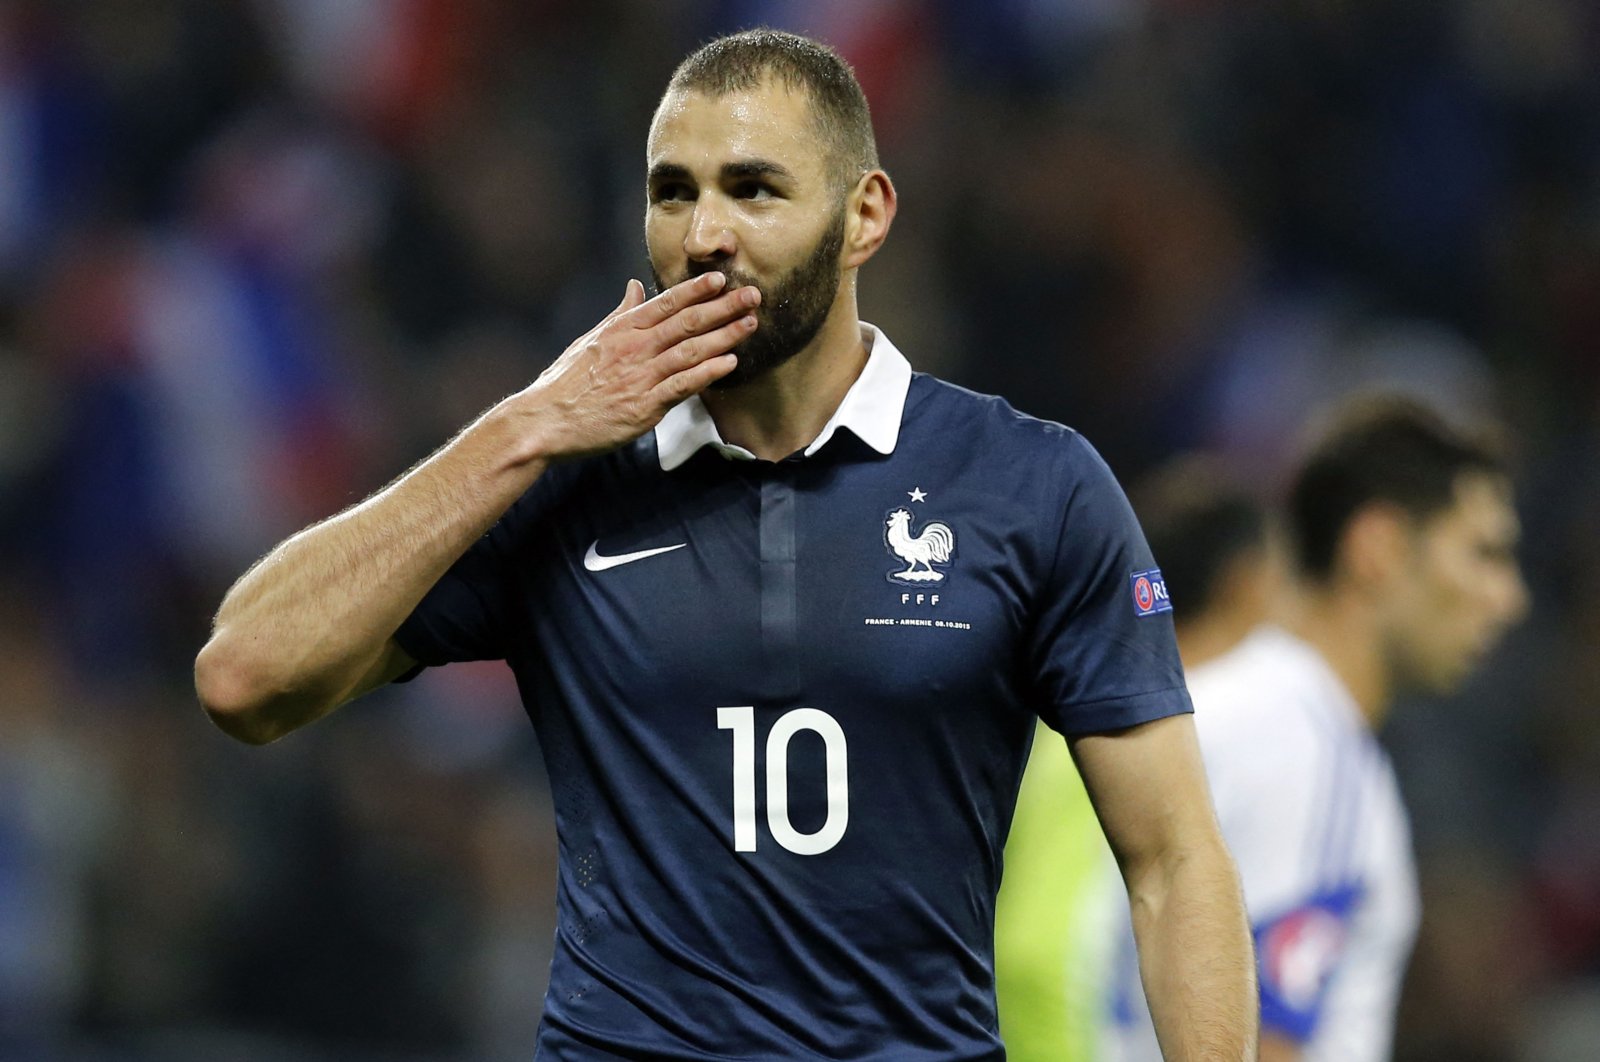 France's forward Karim Benzema celebrates after scoring a goal during the friendly football match between France and Armenia at the Allianz Riviera stadium in Nice, southeastern France, Oct. 9, 2015. (AFP Photo)